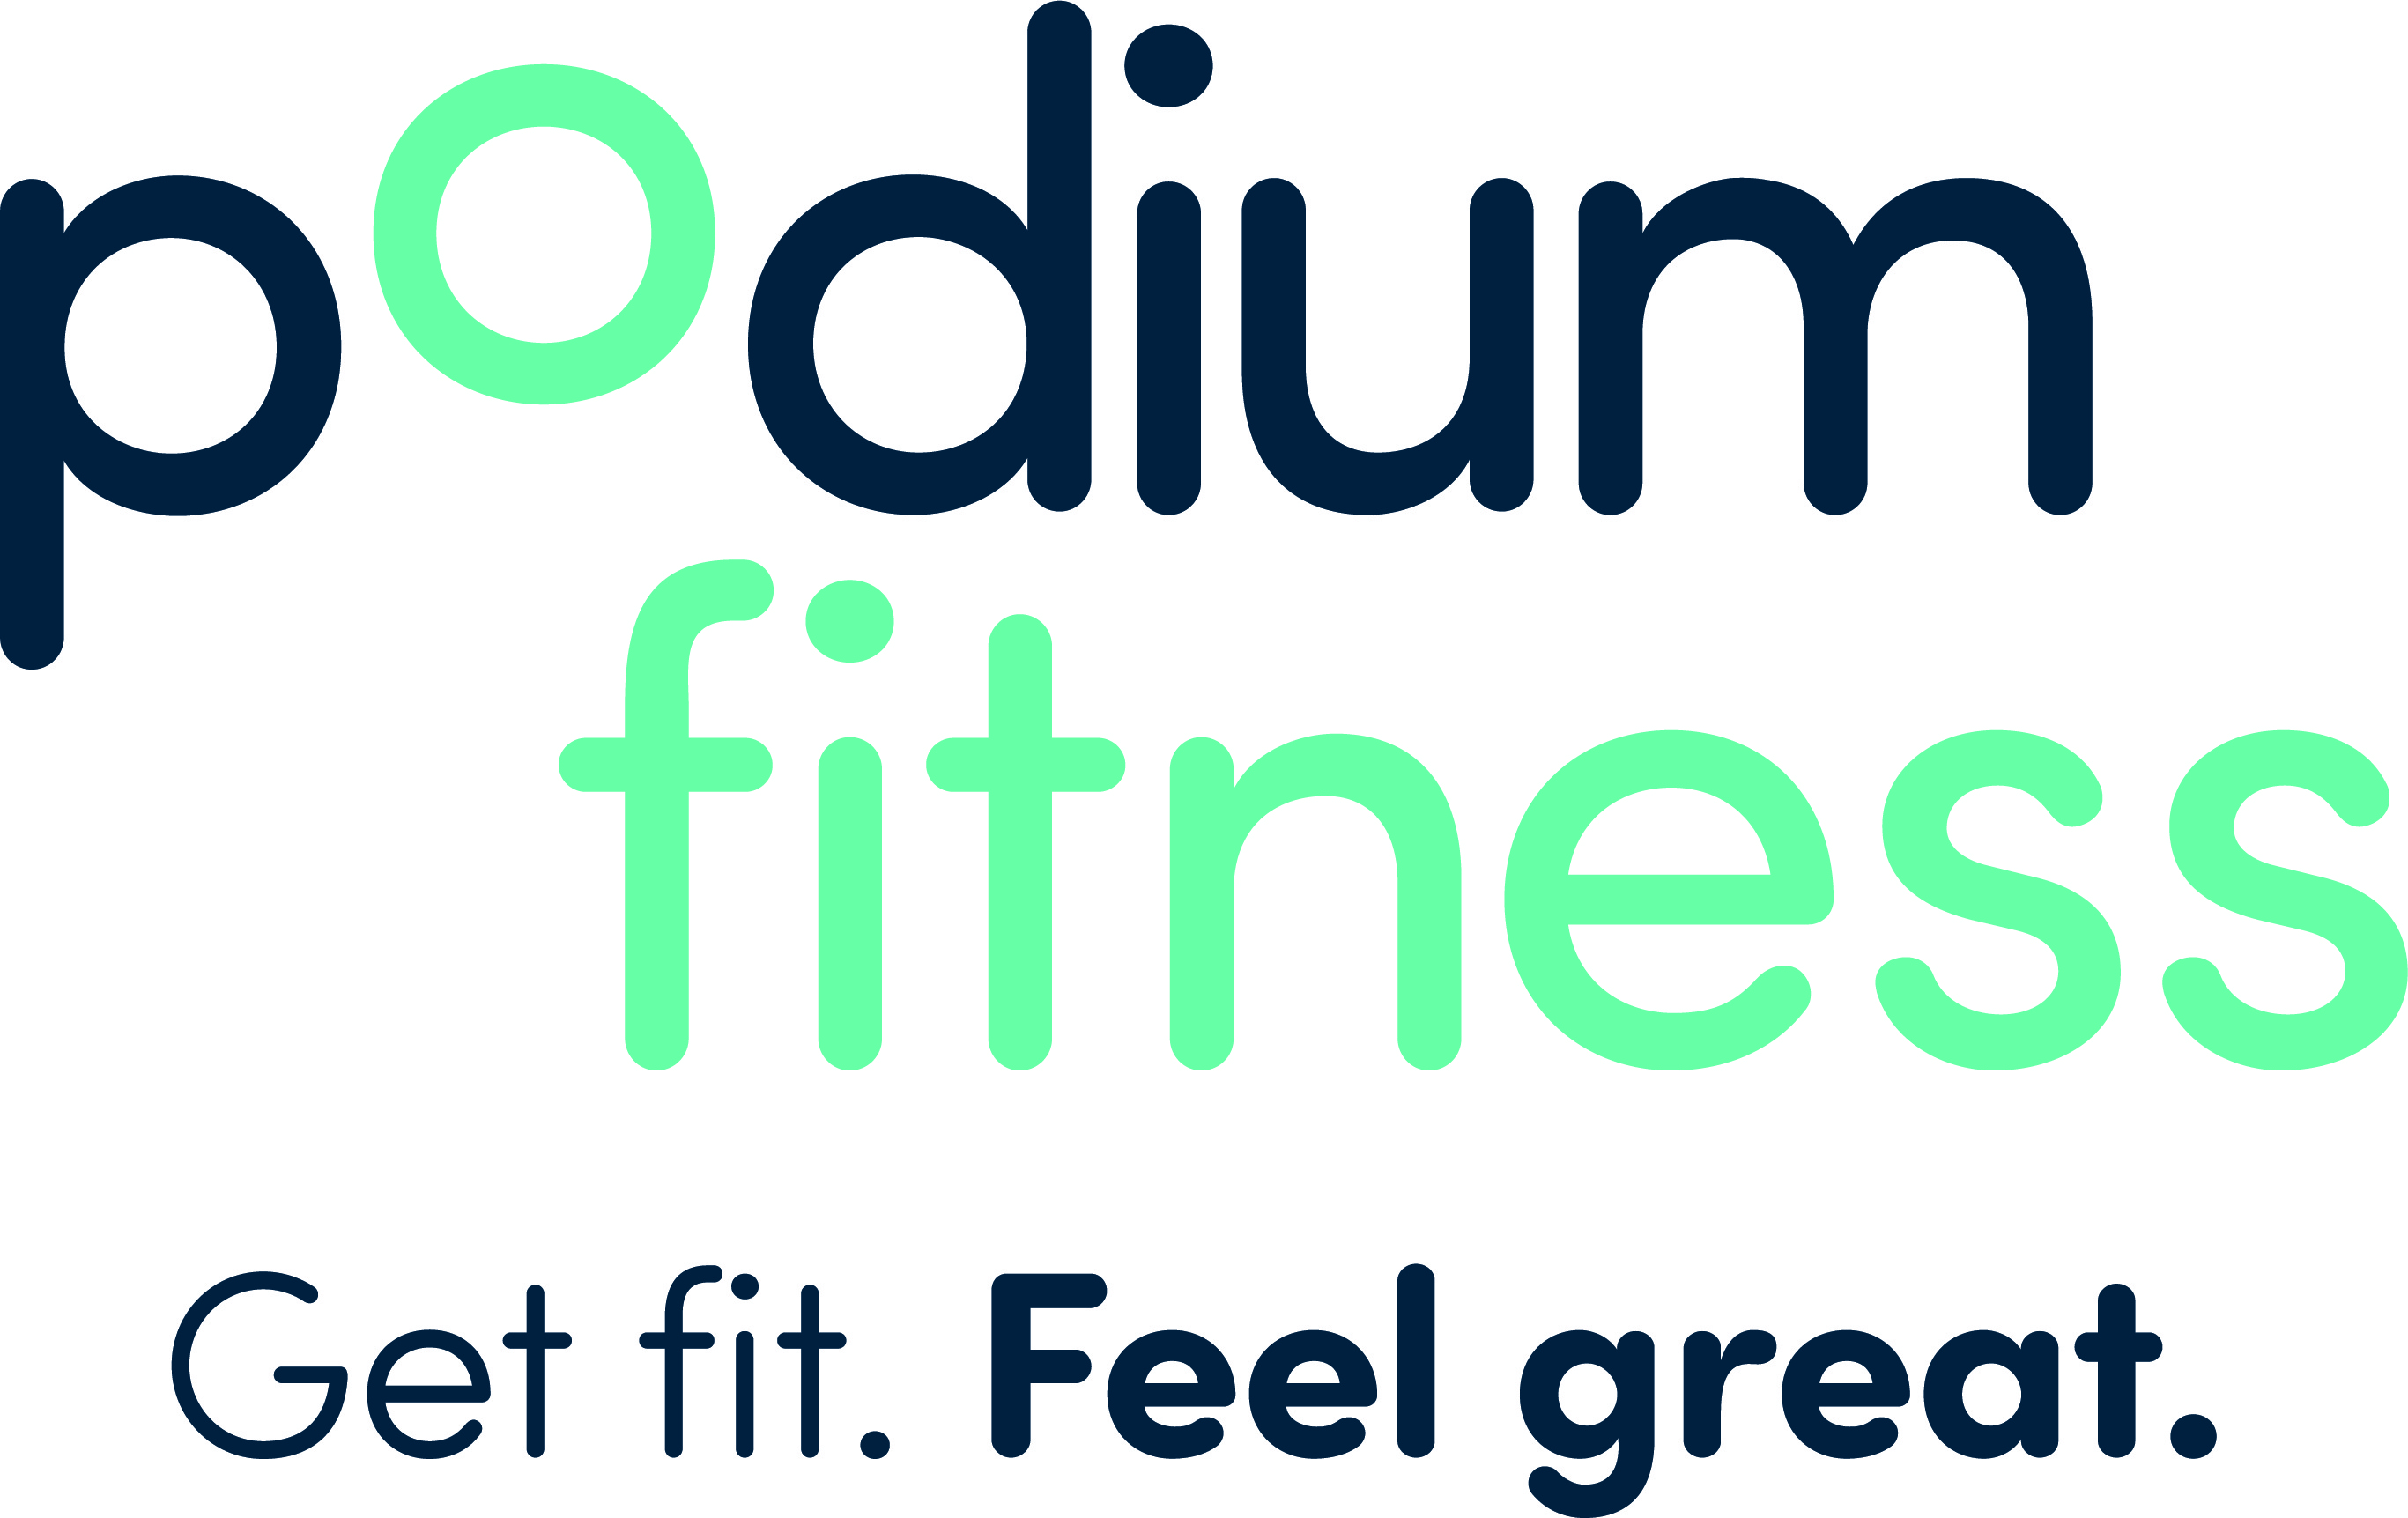 Support South Hill Park And Get Fit With Podium Fitness